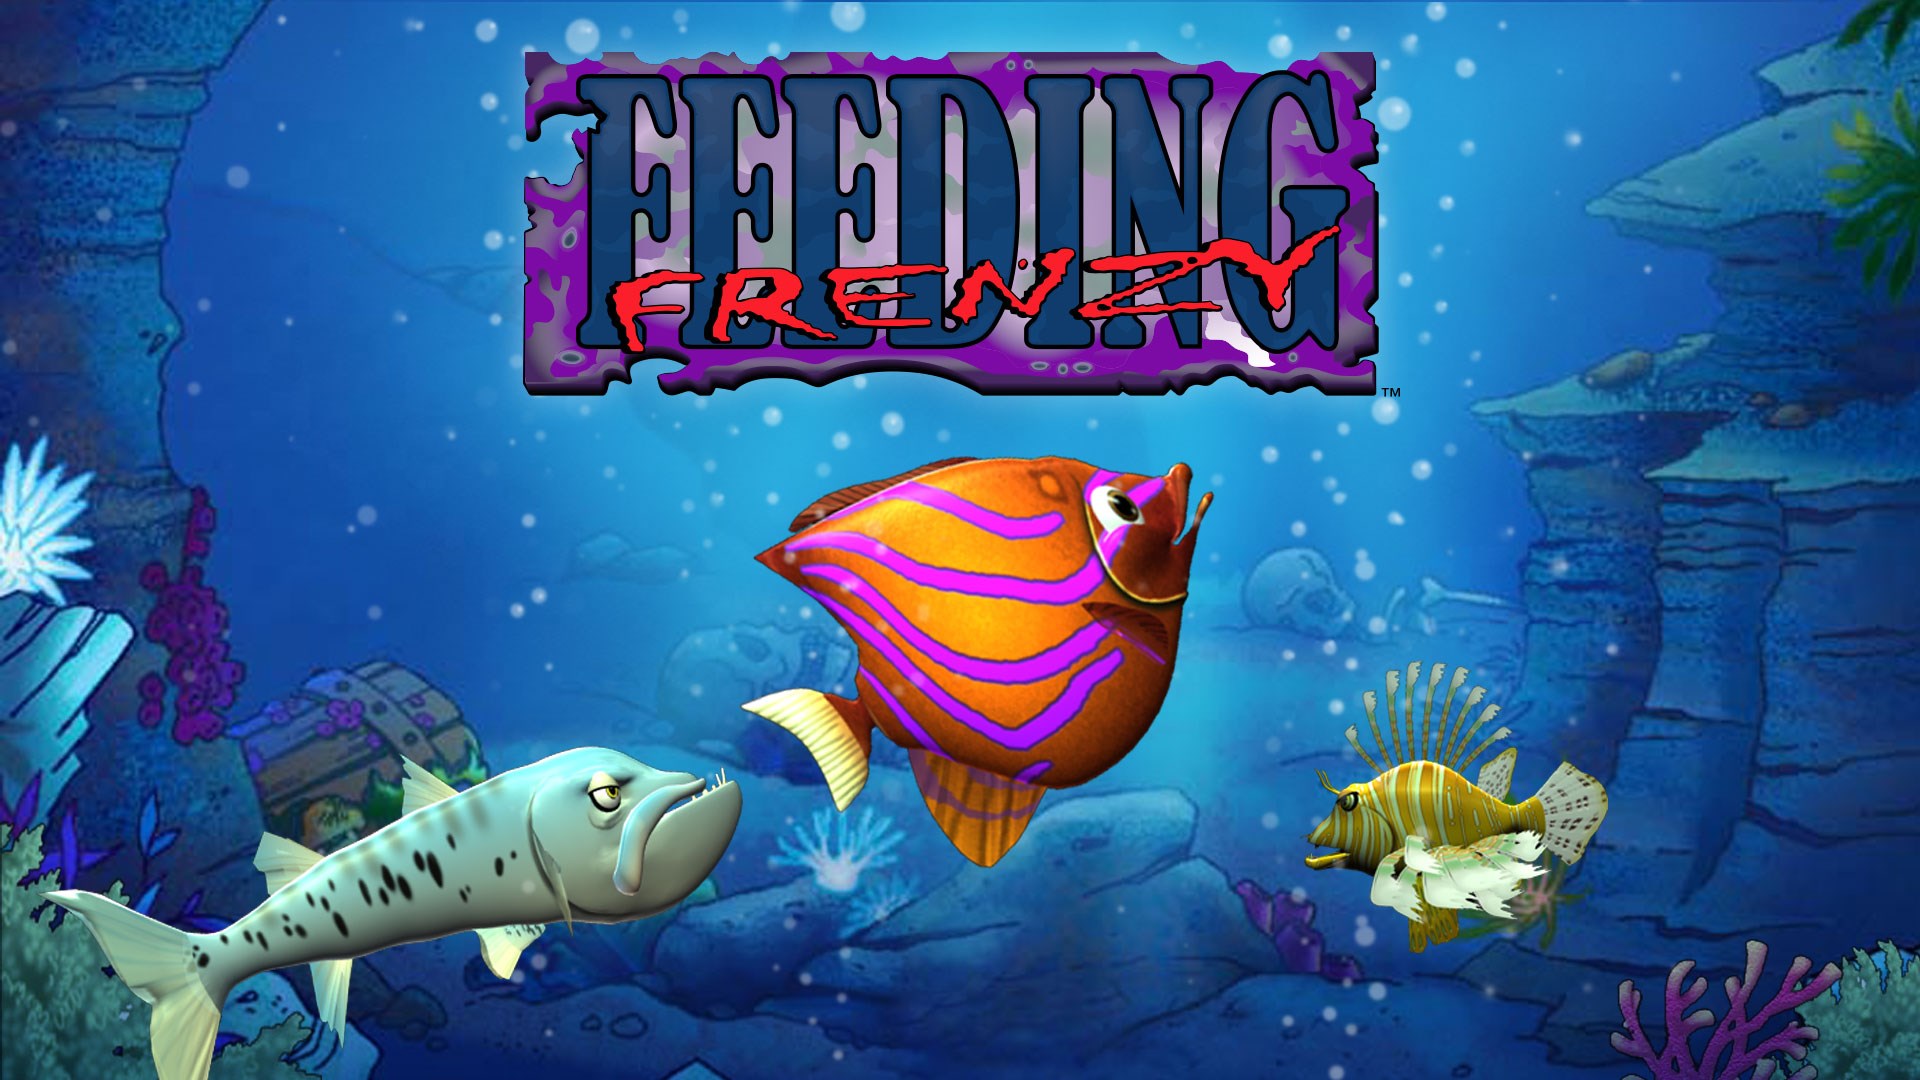 Download feeding frenzy for pc can you download a movie from amazon prime